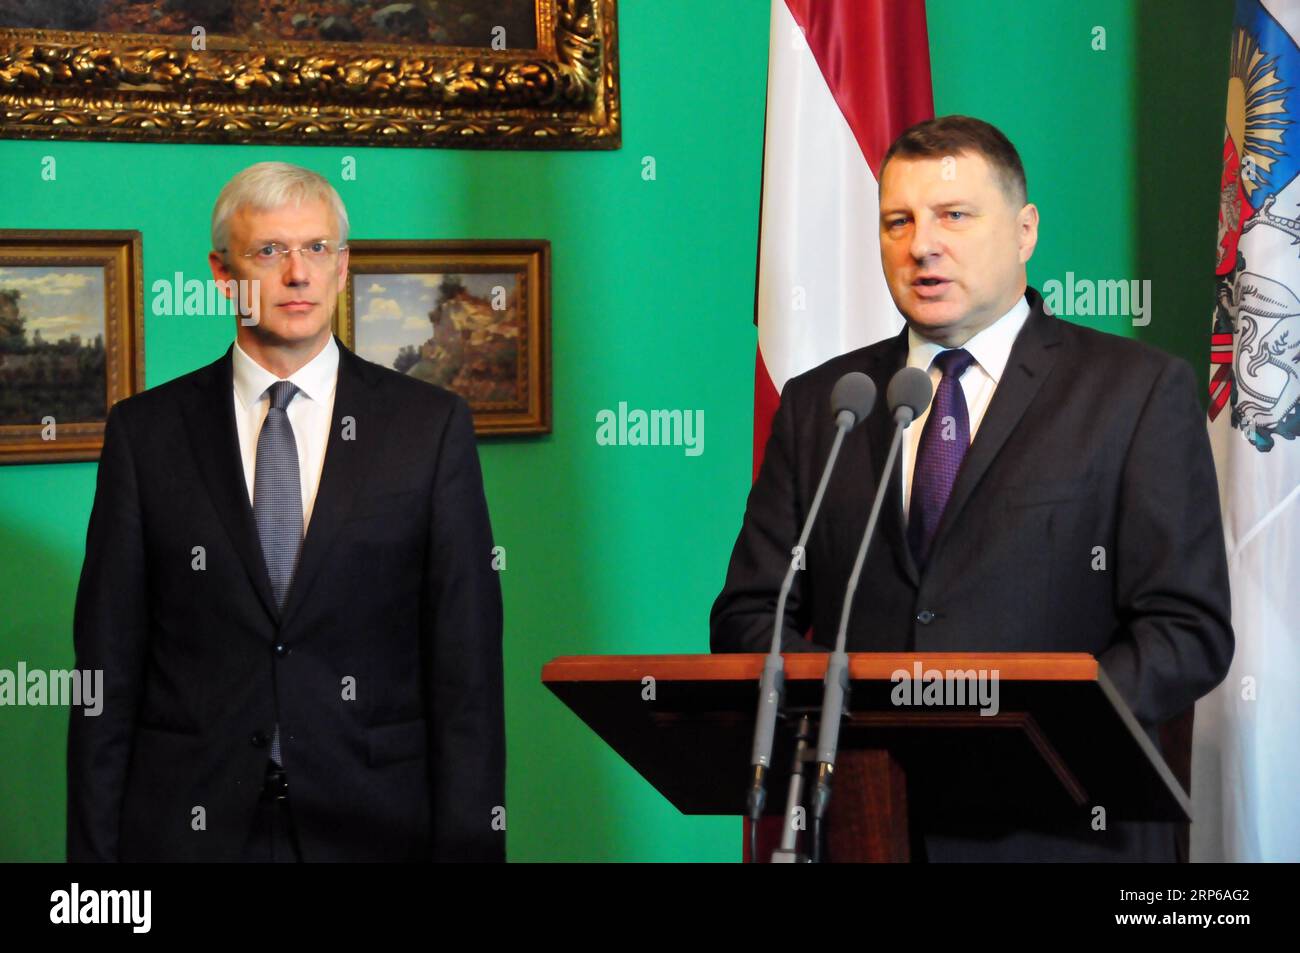 (190107) -- RIGA, Jan. 7, 2019 -- Latvian President Raimonds Vejonis (R) and the candidate for prime minister Kris Karins attend a press conference in Riga, Latvia, on Jan. 7, 2019. Raimonds Vejonis on Monday asked Kris Karins, a member of the European Parliament from the center-right New Unity party, to form the Baltic country s next government. ) LATVIA-RIGA-PM-NOMINATION Janis PUBLICATIONxNOTxINxCHN Stock Photo